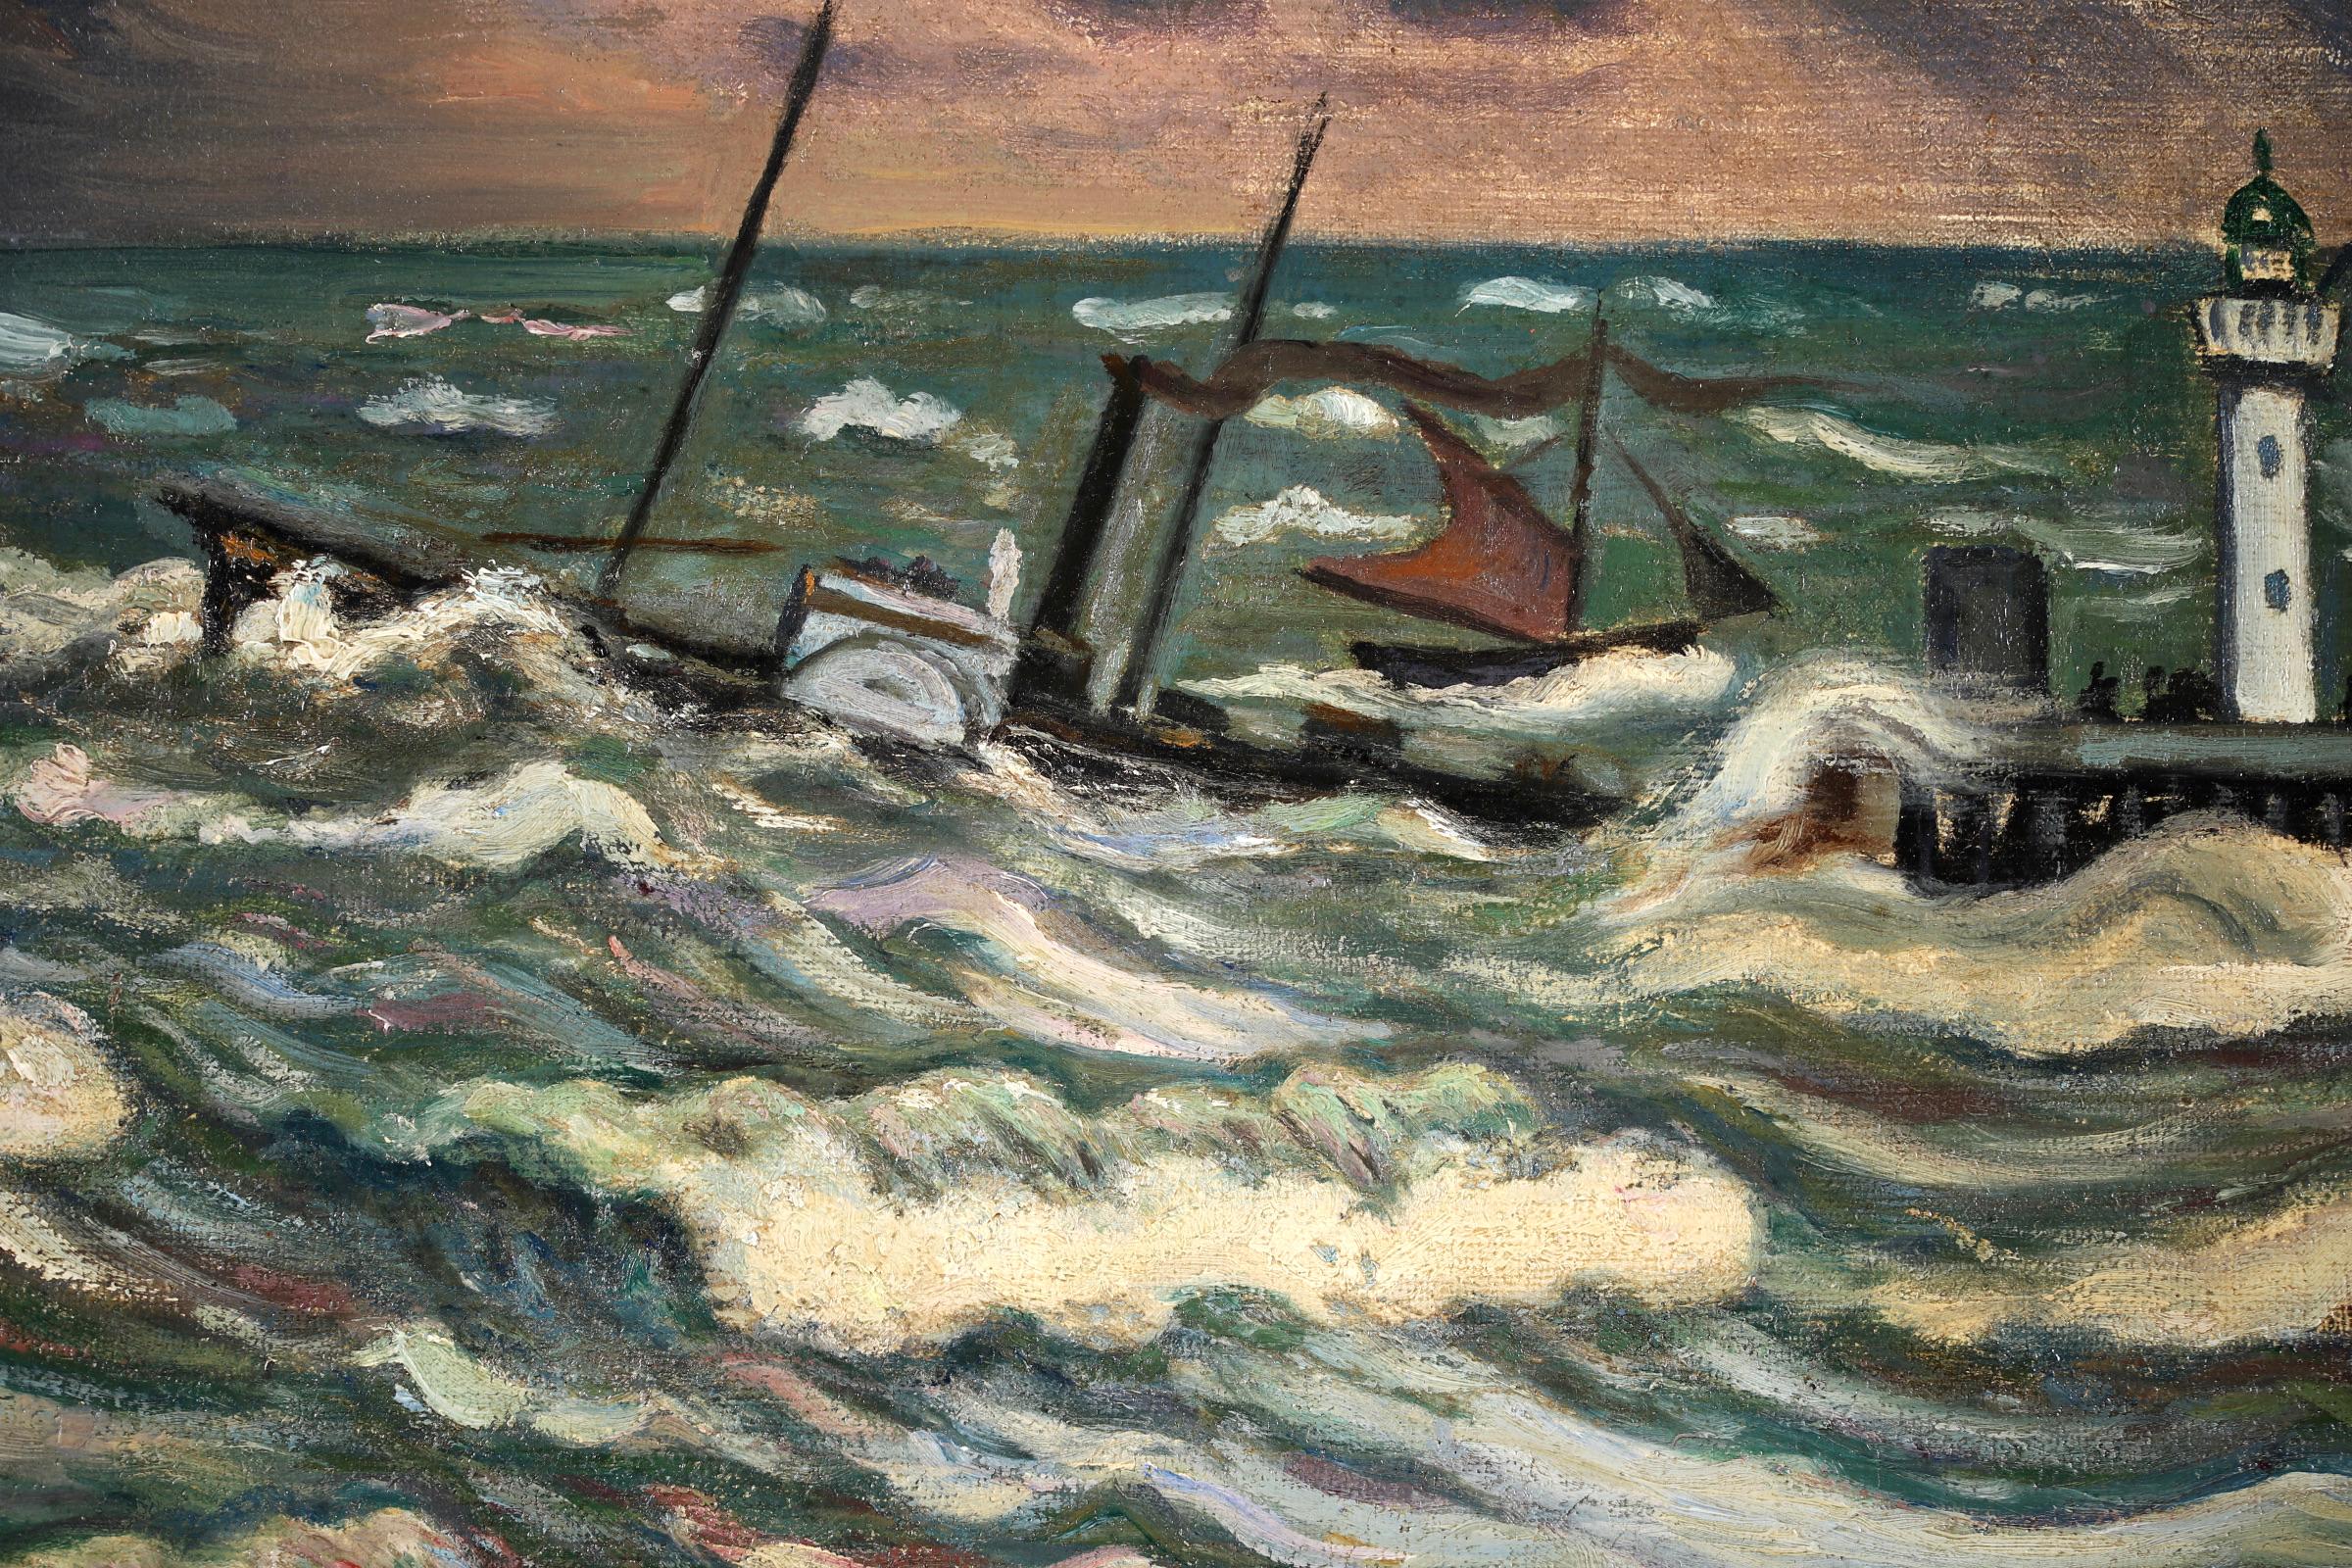 A wonderful oil on canvas circa 1908 by French post impressionist painter Henri Liénard de Saint-Délis depicting a boat docked at the harbour in the harbour at Honfleur, Northern France, in a stormy sea. A shadowy figure standing on the beach in the